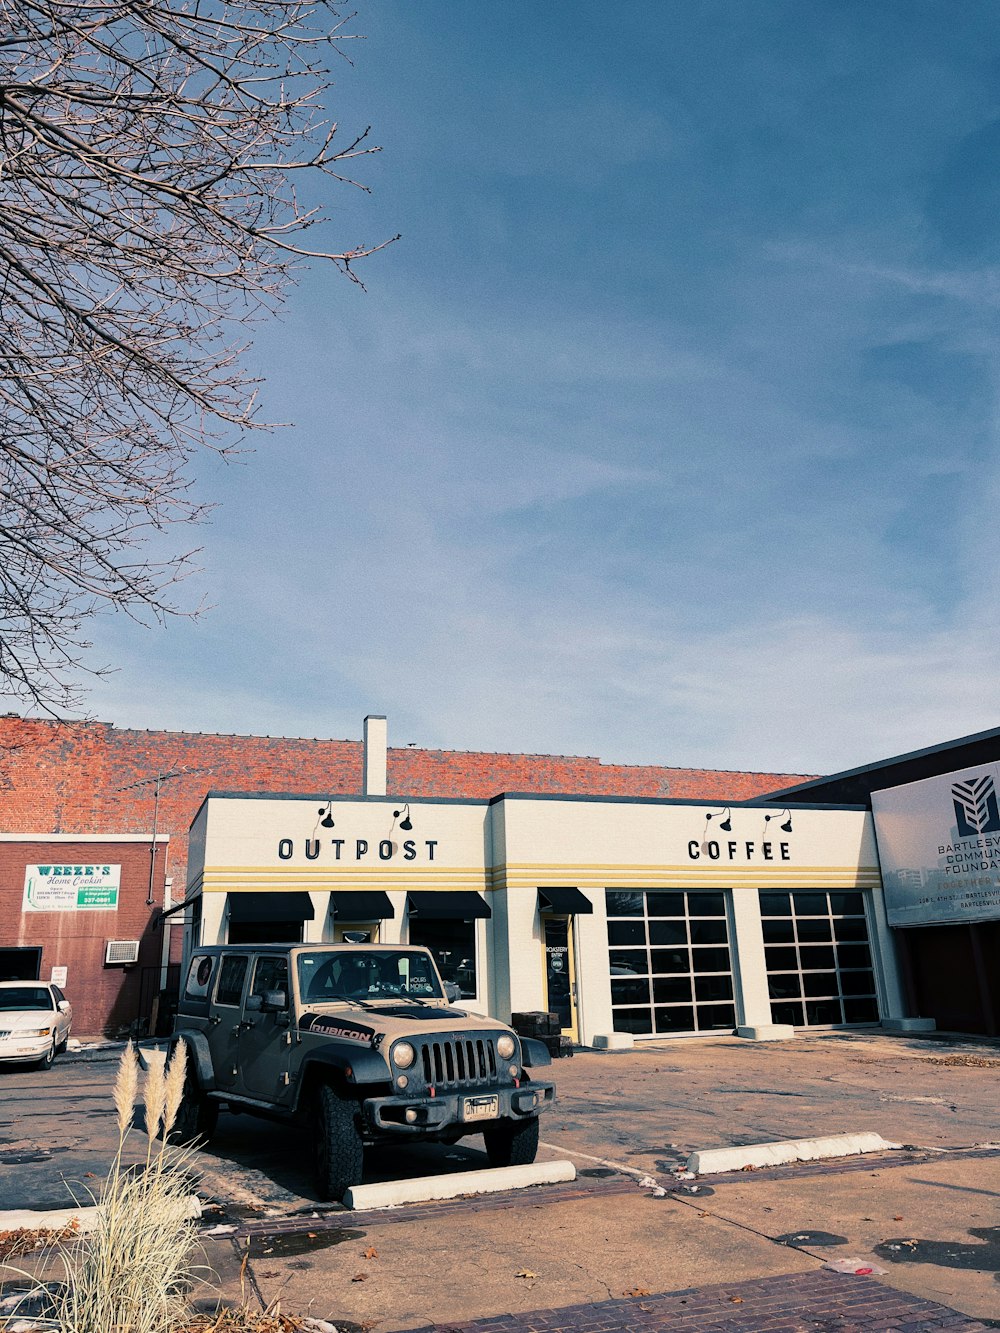 a jeep is parked in front of a building